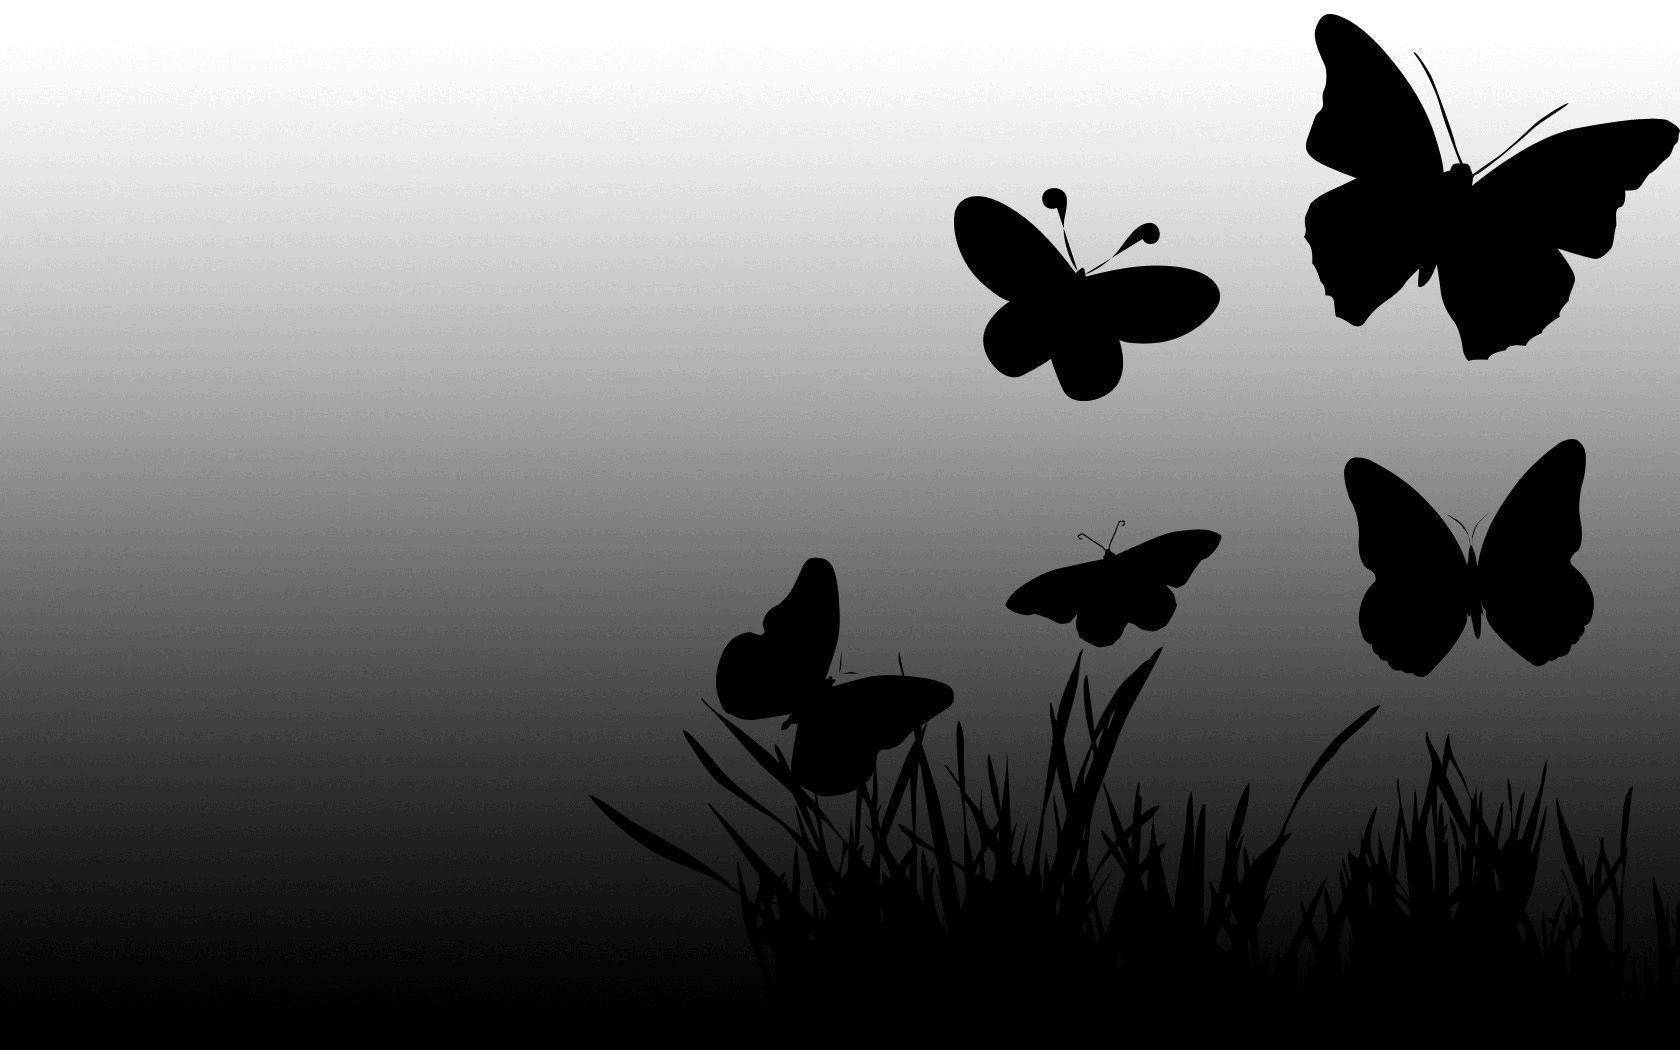 Solid Black Butterfly Graphics With Grass Wallpaper